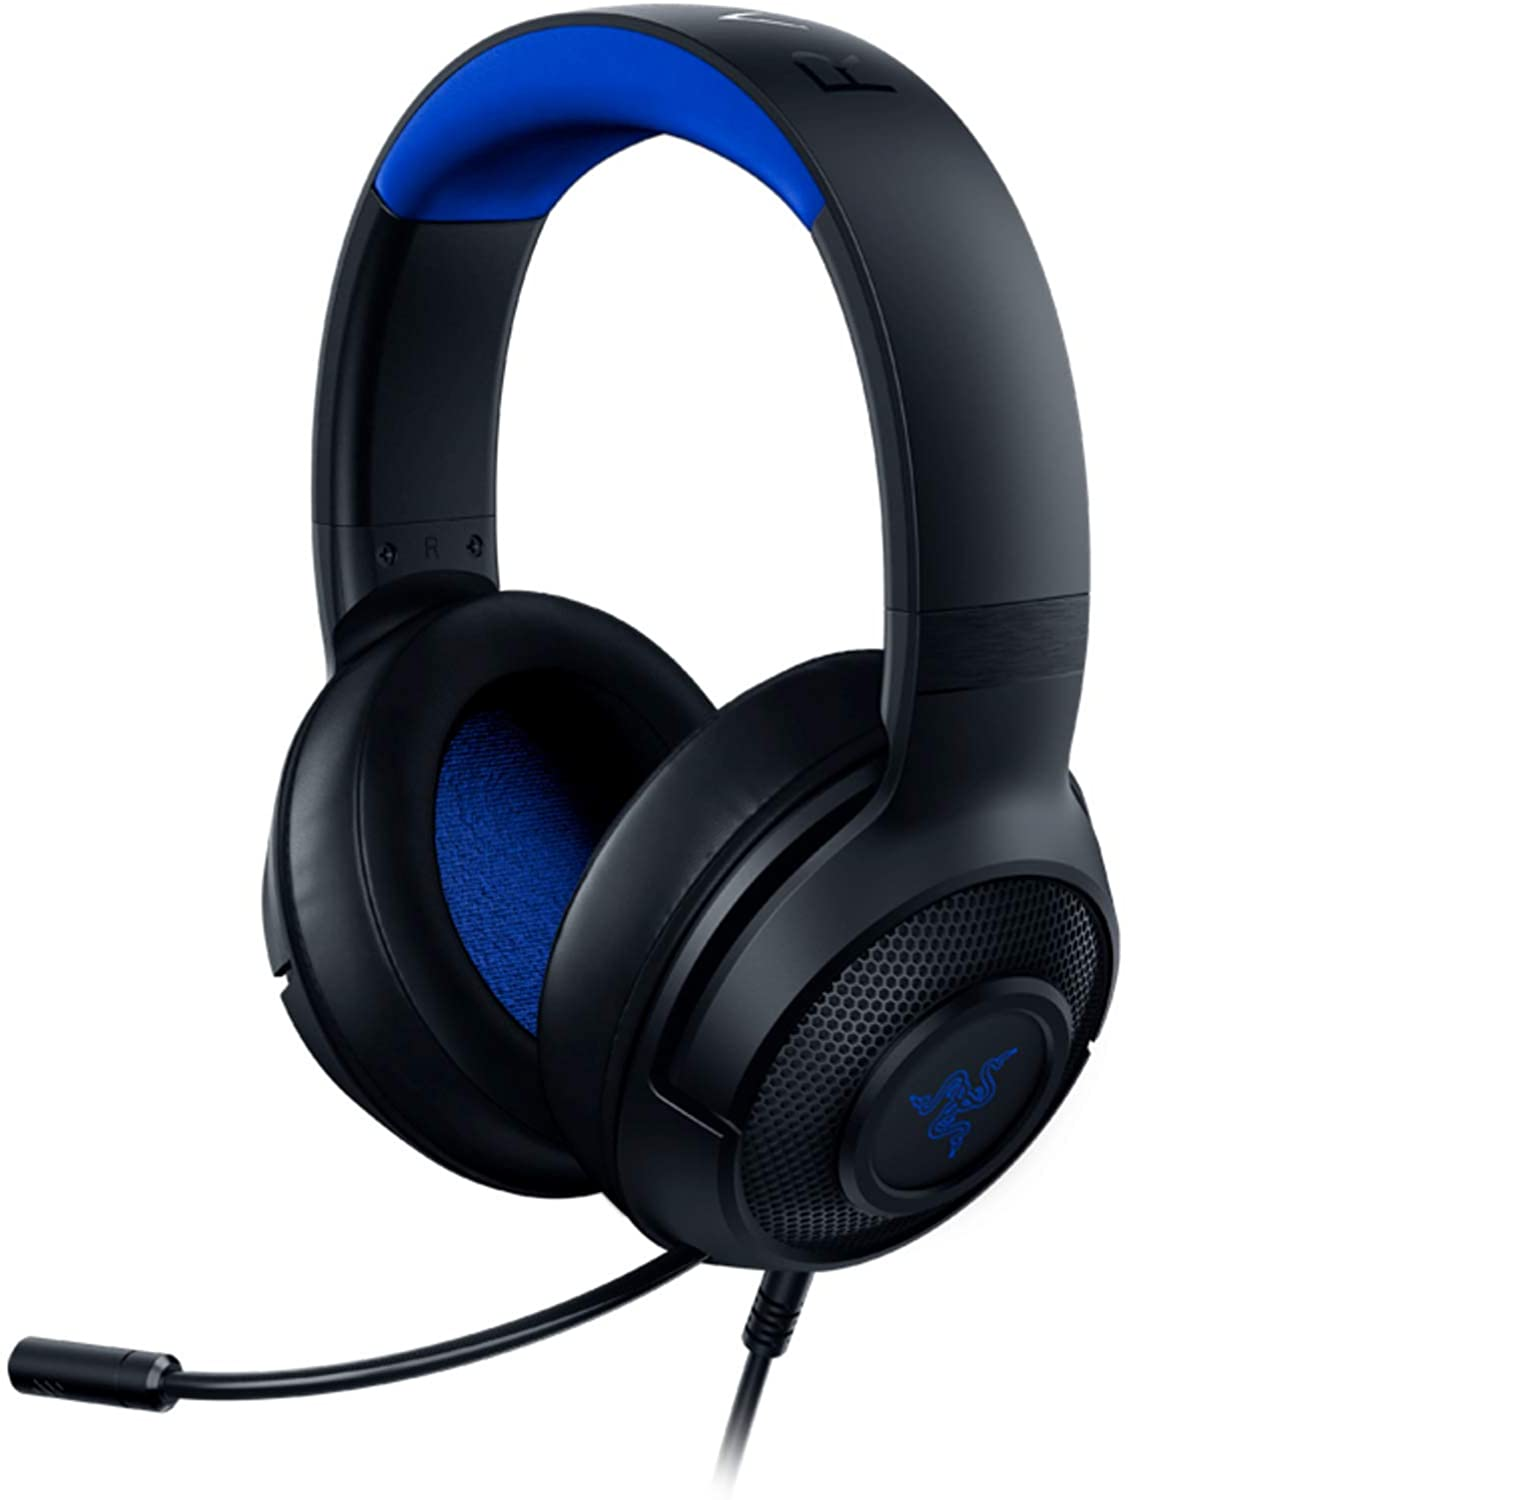 Razer Kraken Gaming Headset with Cooling Gel Earpads for Ambitious